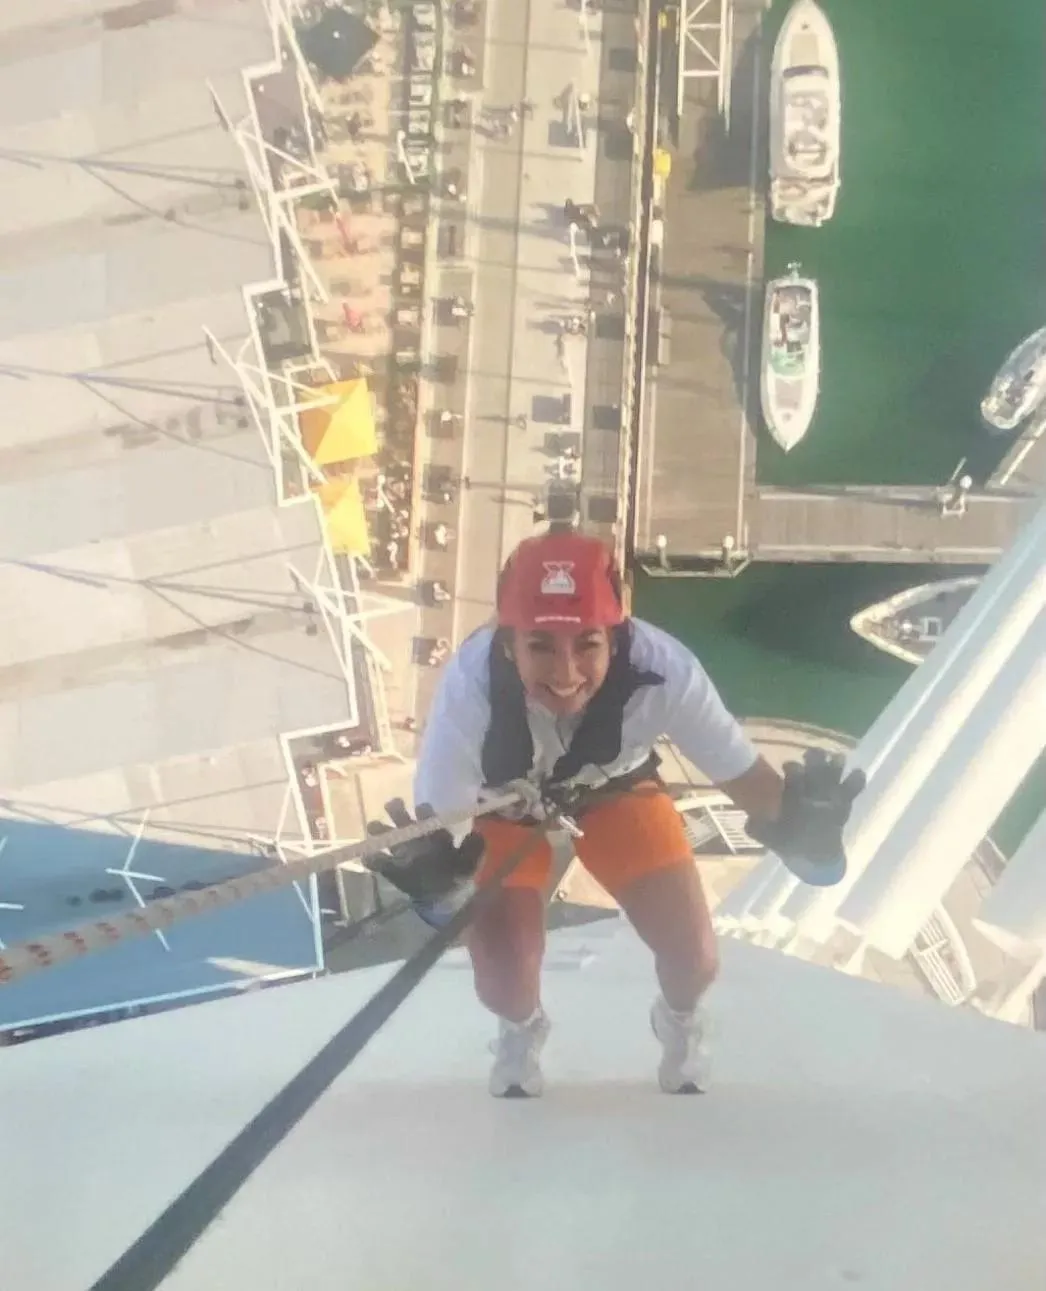 a young person photographed from above as they abseil down a tower. they are wearing a red hard helmet and attached to a rope and harness. boats, jetties and water can be seen below them.